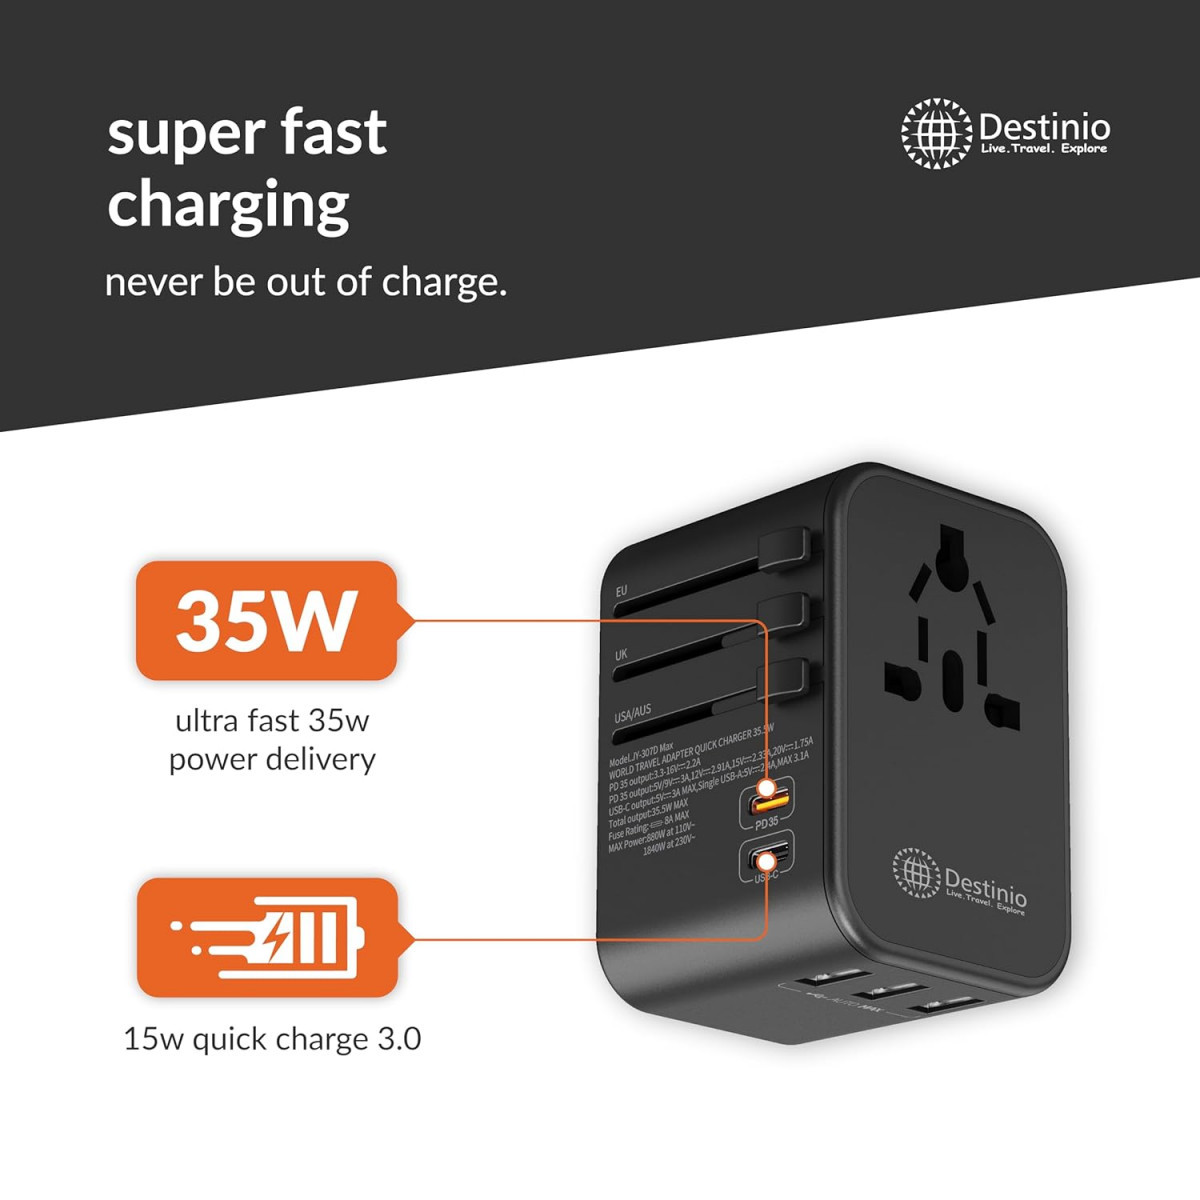 Destinio Universal Travel Adapter - 6-in-1 Fast 35w Charging International Charger with PD Type C  3 USB Ports - All-in-One for US UK Europe - Type C Compatible